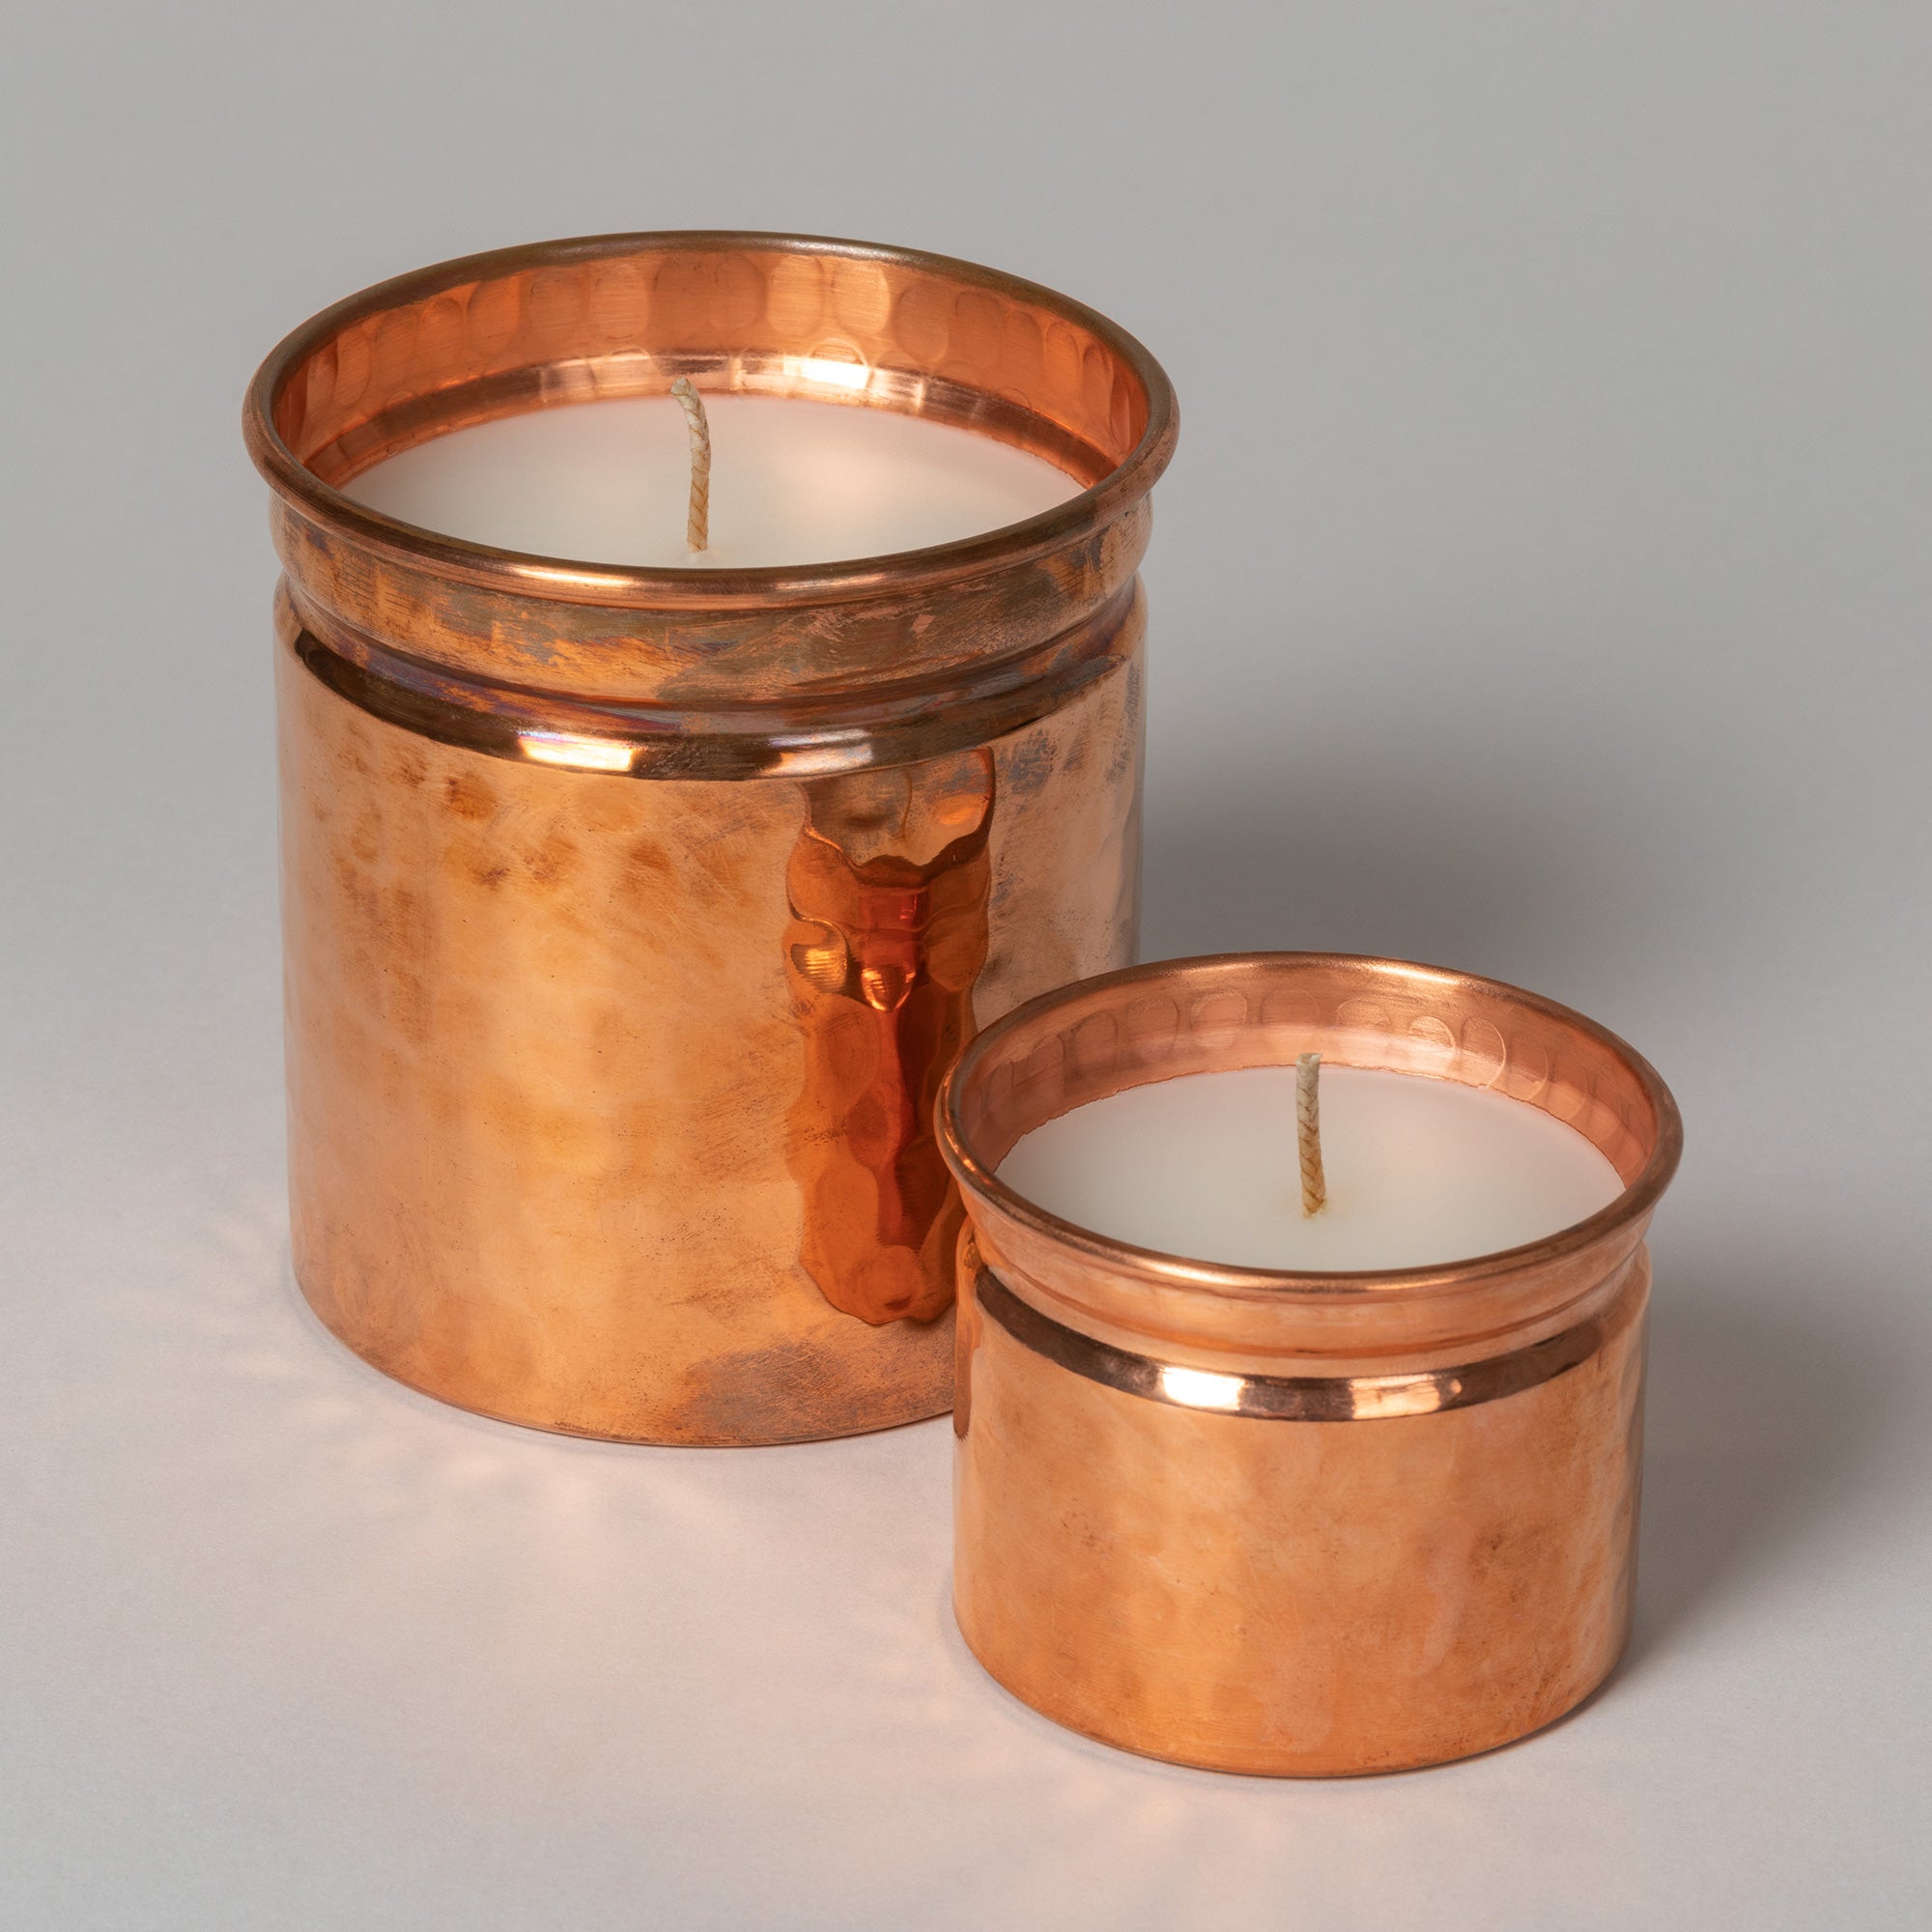 Copper Artisan Hand-Poured Candle - S